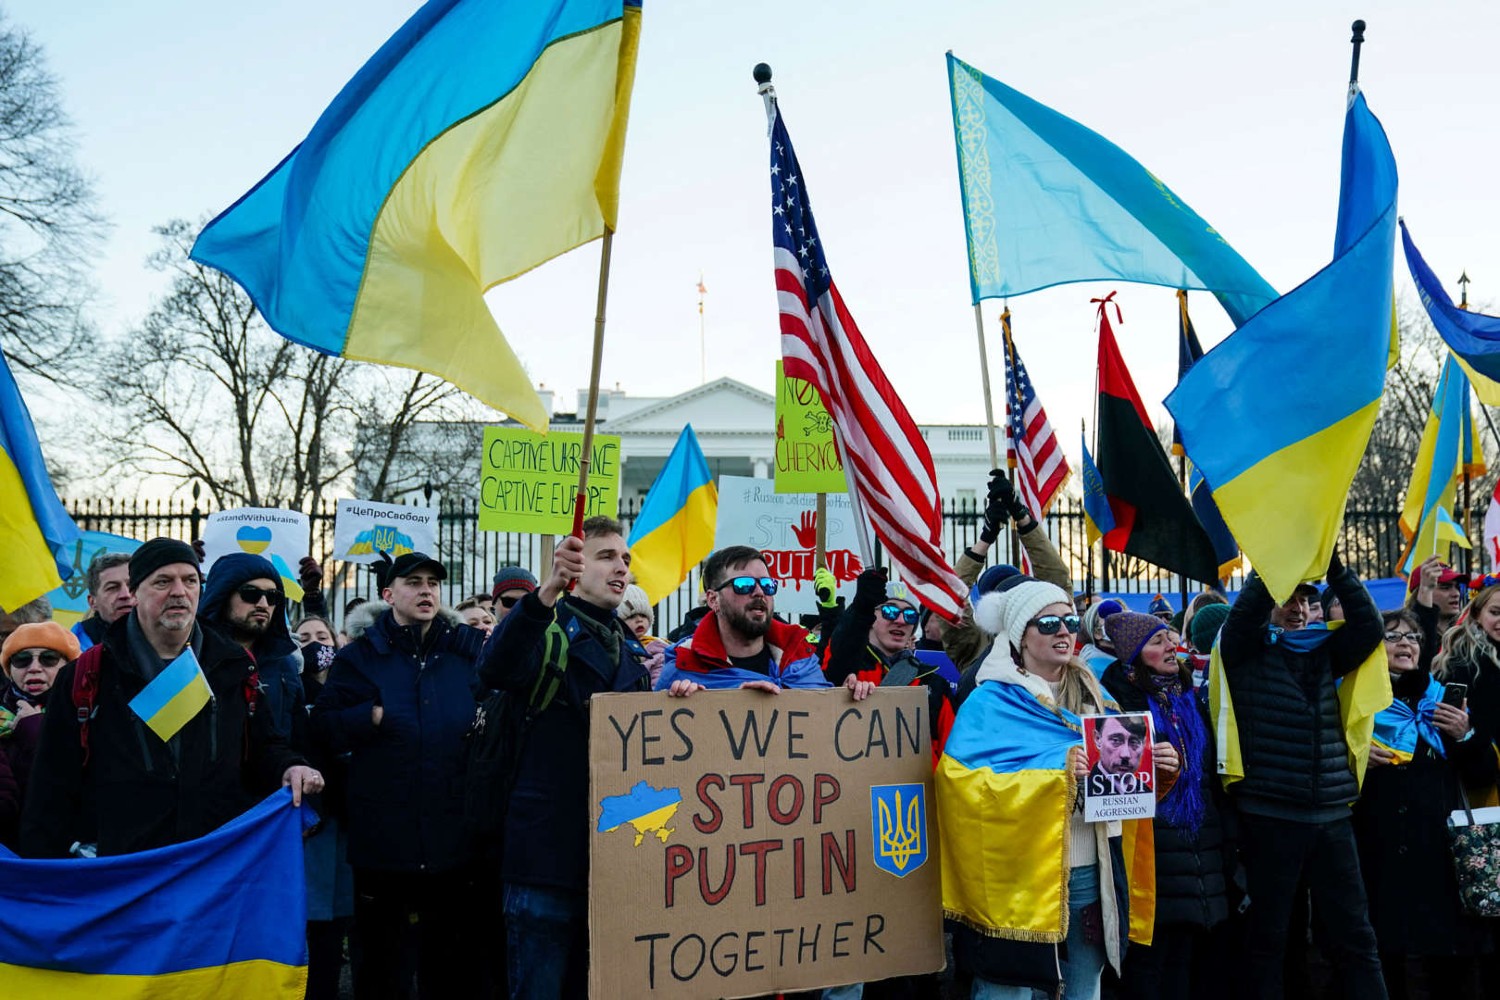 Demonstrators participate in the "Stand with Ukraine" rally in Lafayette Square near the White House in Washington, February 20, 2022. REUTERS/Sarah Silbiger